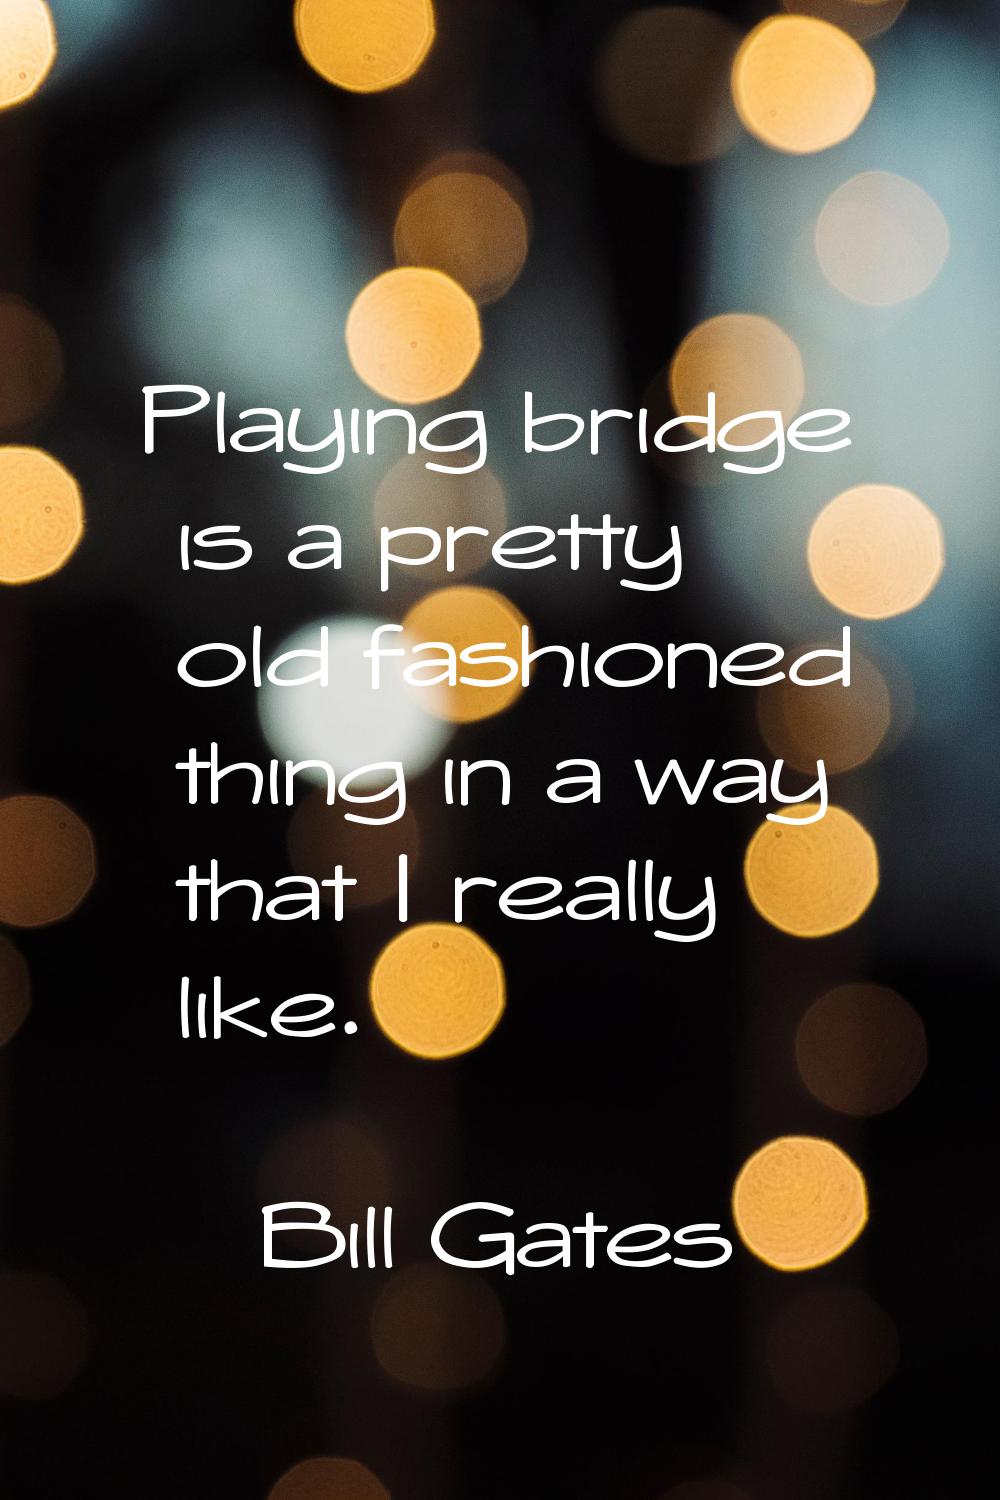 Playing bridge is a pretty old fashioned thing in a way that I really like.